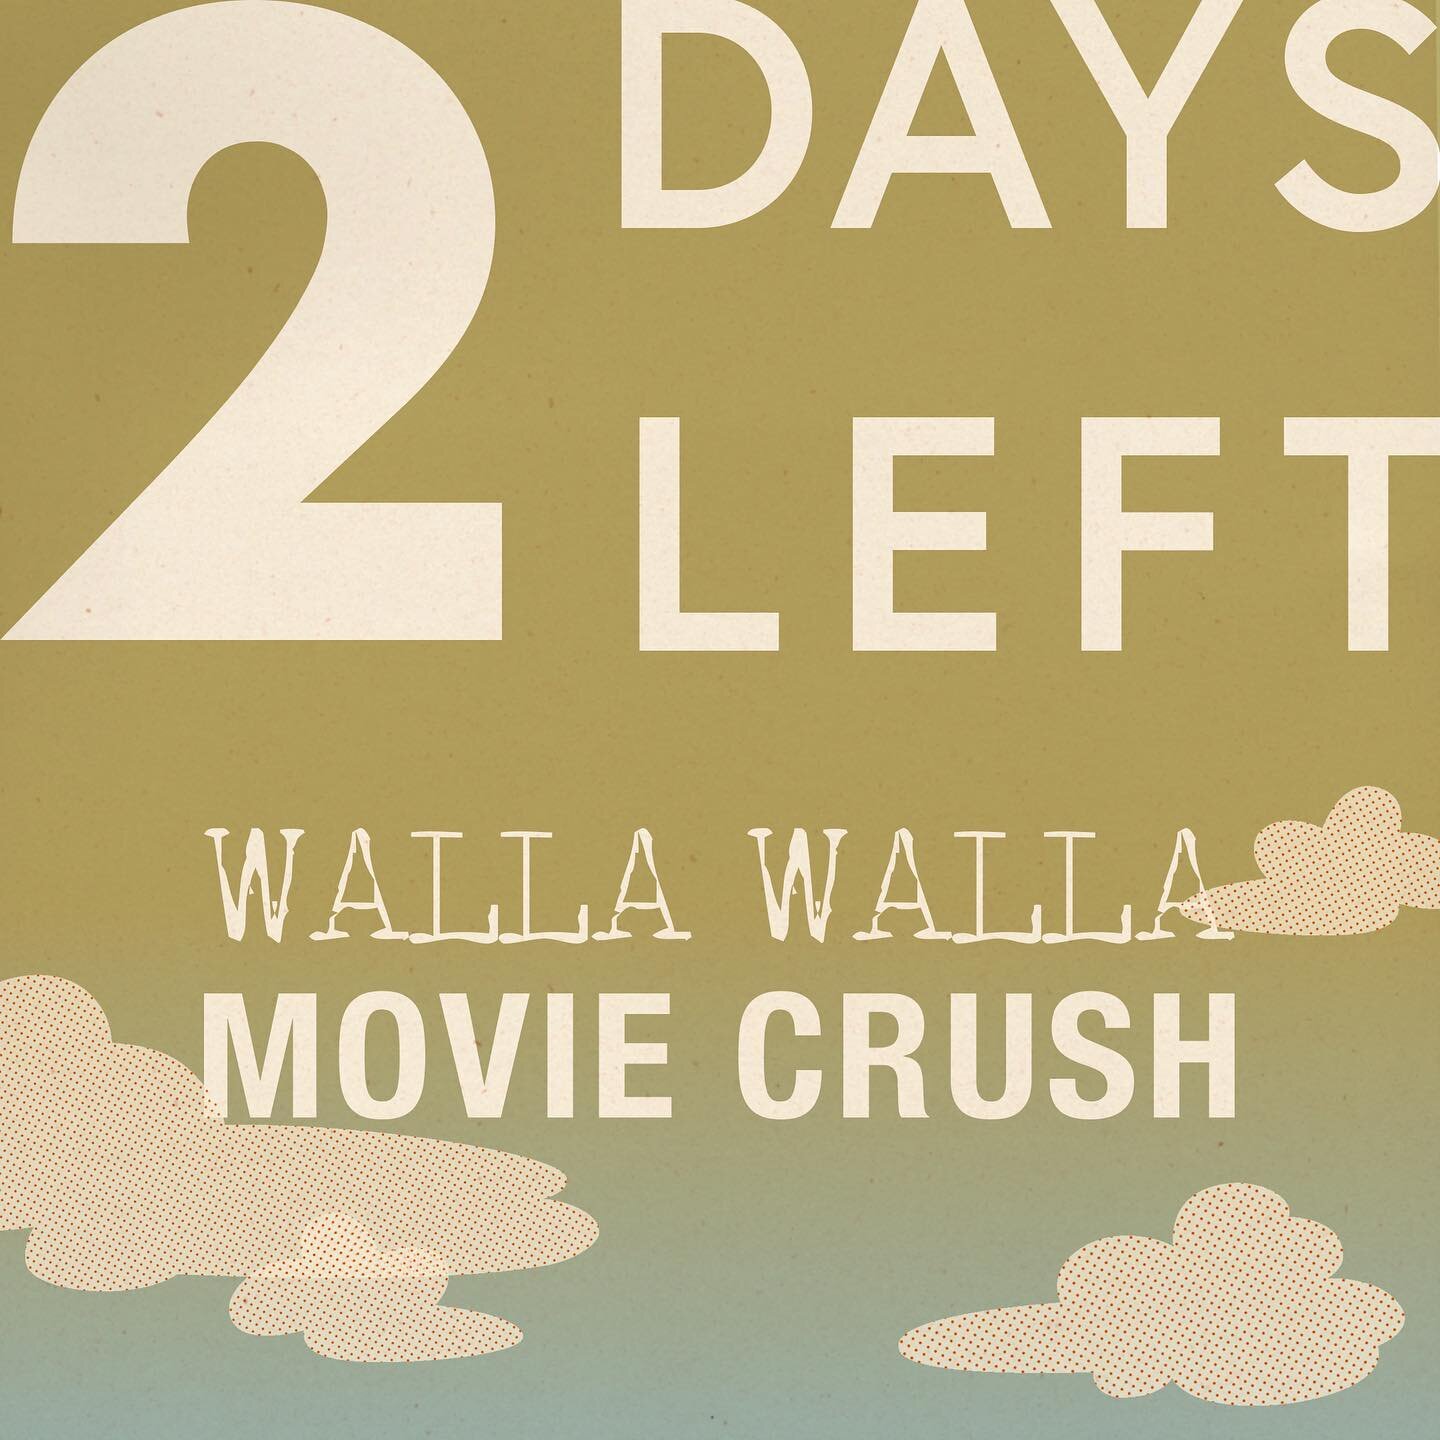 2 days until WWMC returns! Here&rsquo;s a short haiku inspired by the planning process: 

Phones ring off the hook
Movie screens flicker with light
Plans fall into place.

#CrushFam4eva #CrushingIt #wallawallahollaholla #wallawalla #shortfilm #filmfe